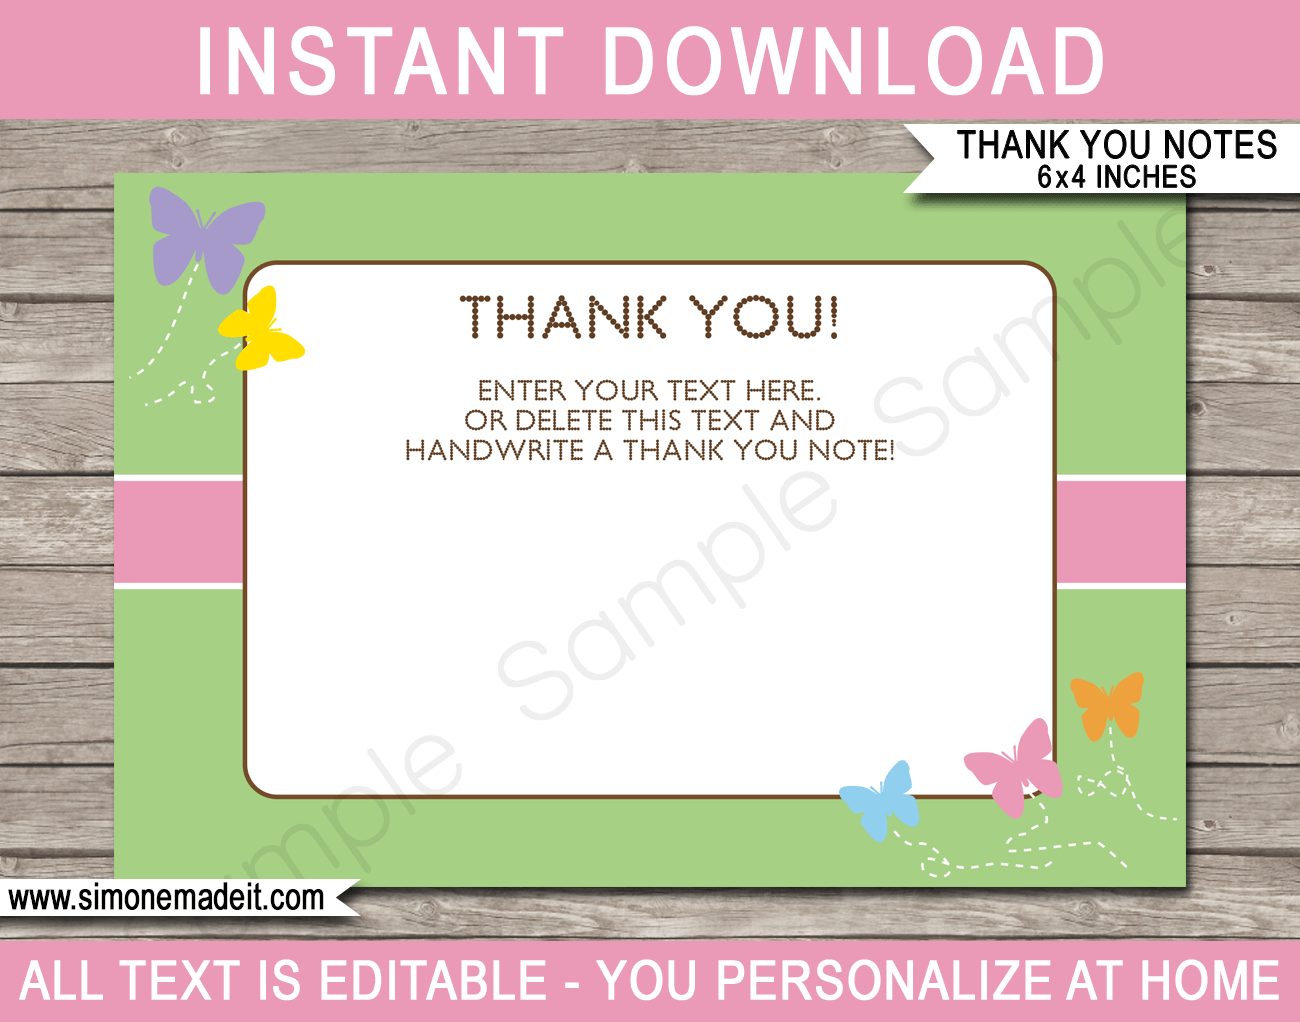 Printable Butterfly Party Thank You Cards - Favor Tags - Butterfly Birthday Party theme - Editable Template - Instant Download via simonemadeit.com